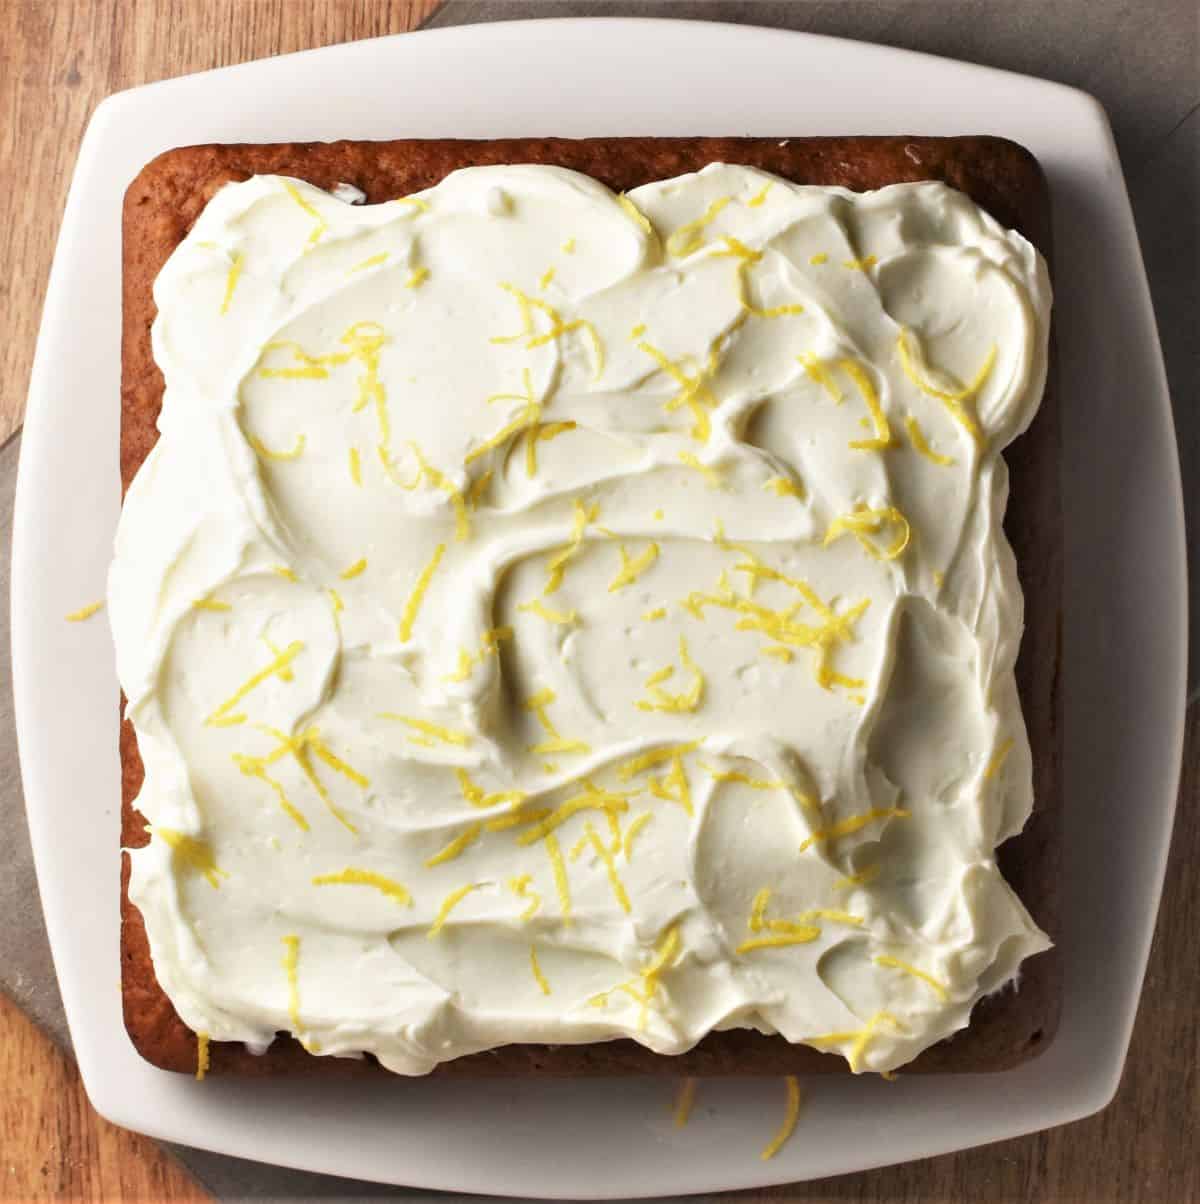 Top down view of pumpkin cake with cheese frosting on white plate.